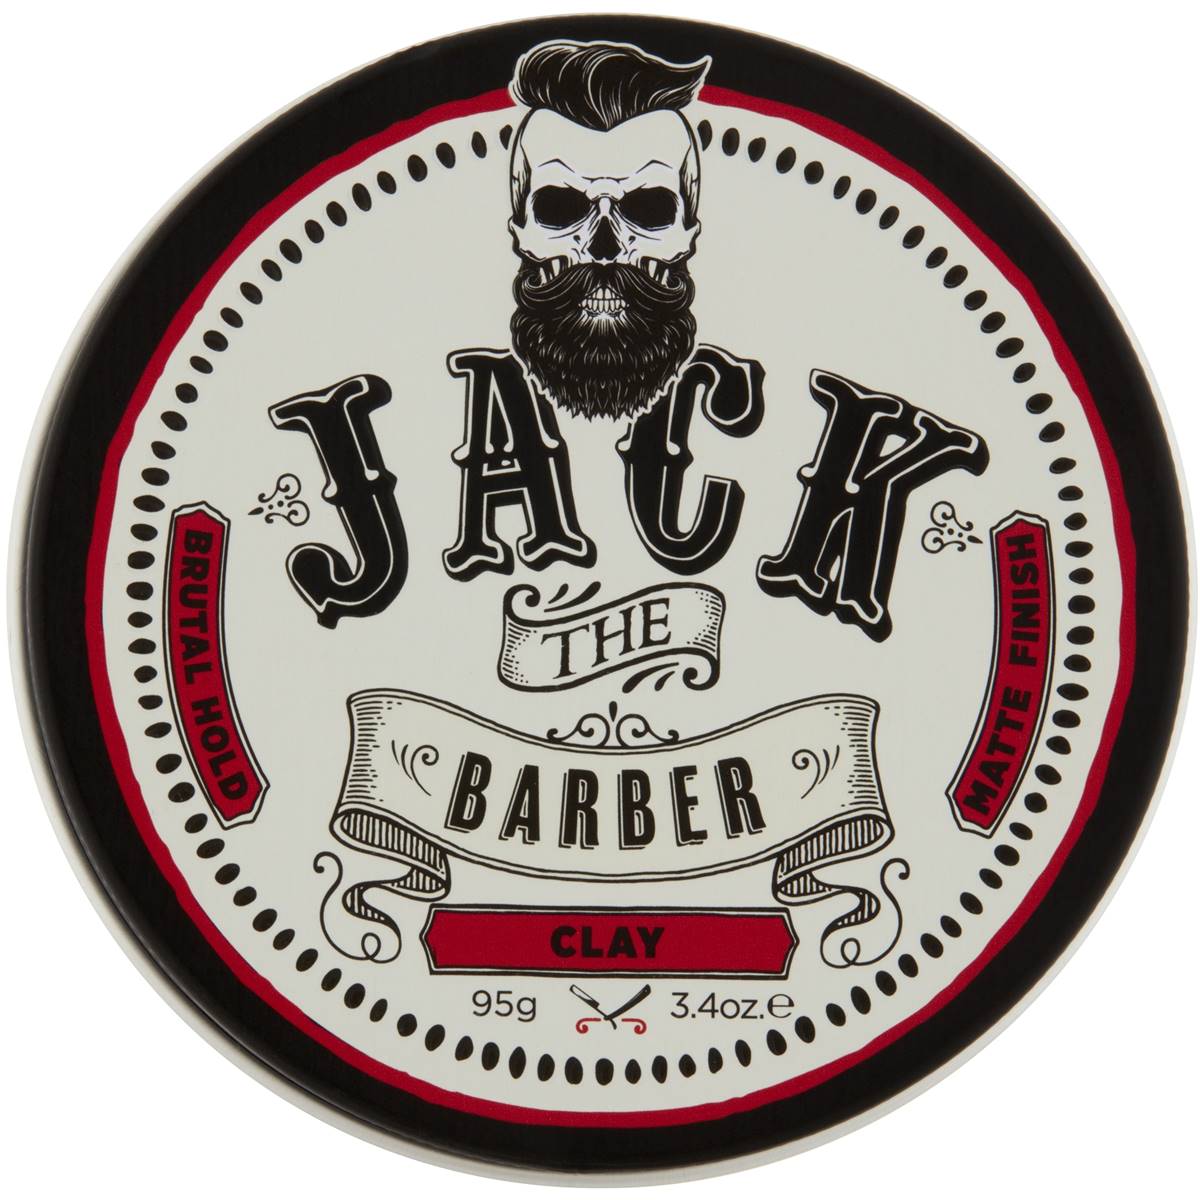 Jack The Barber Clay 95g